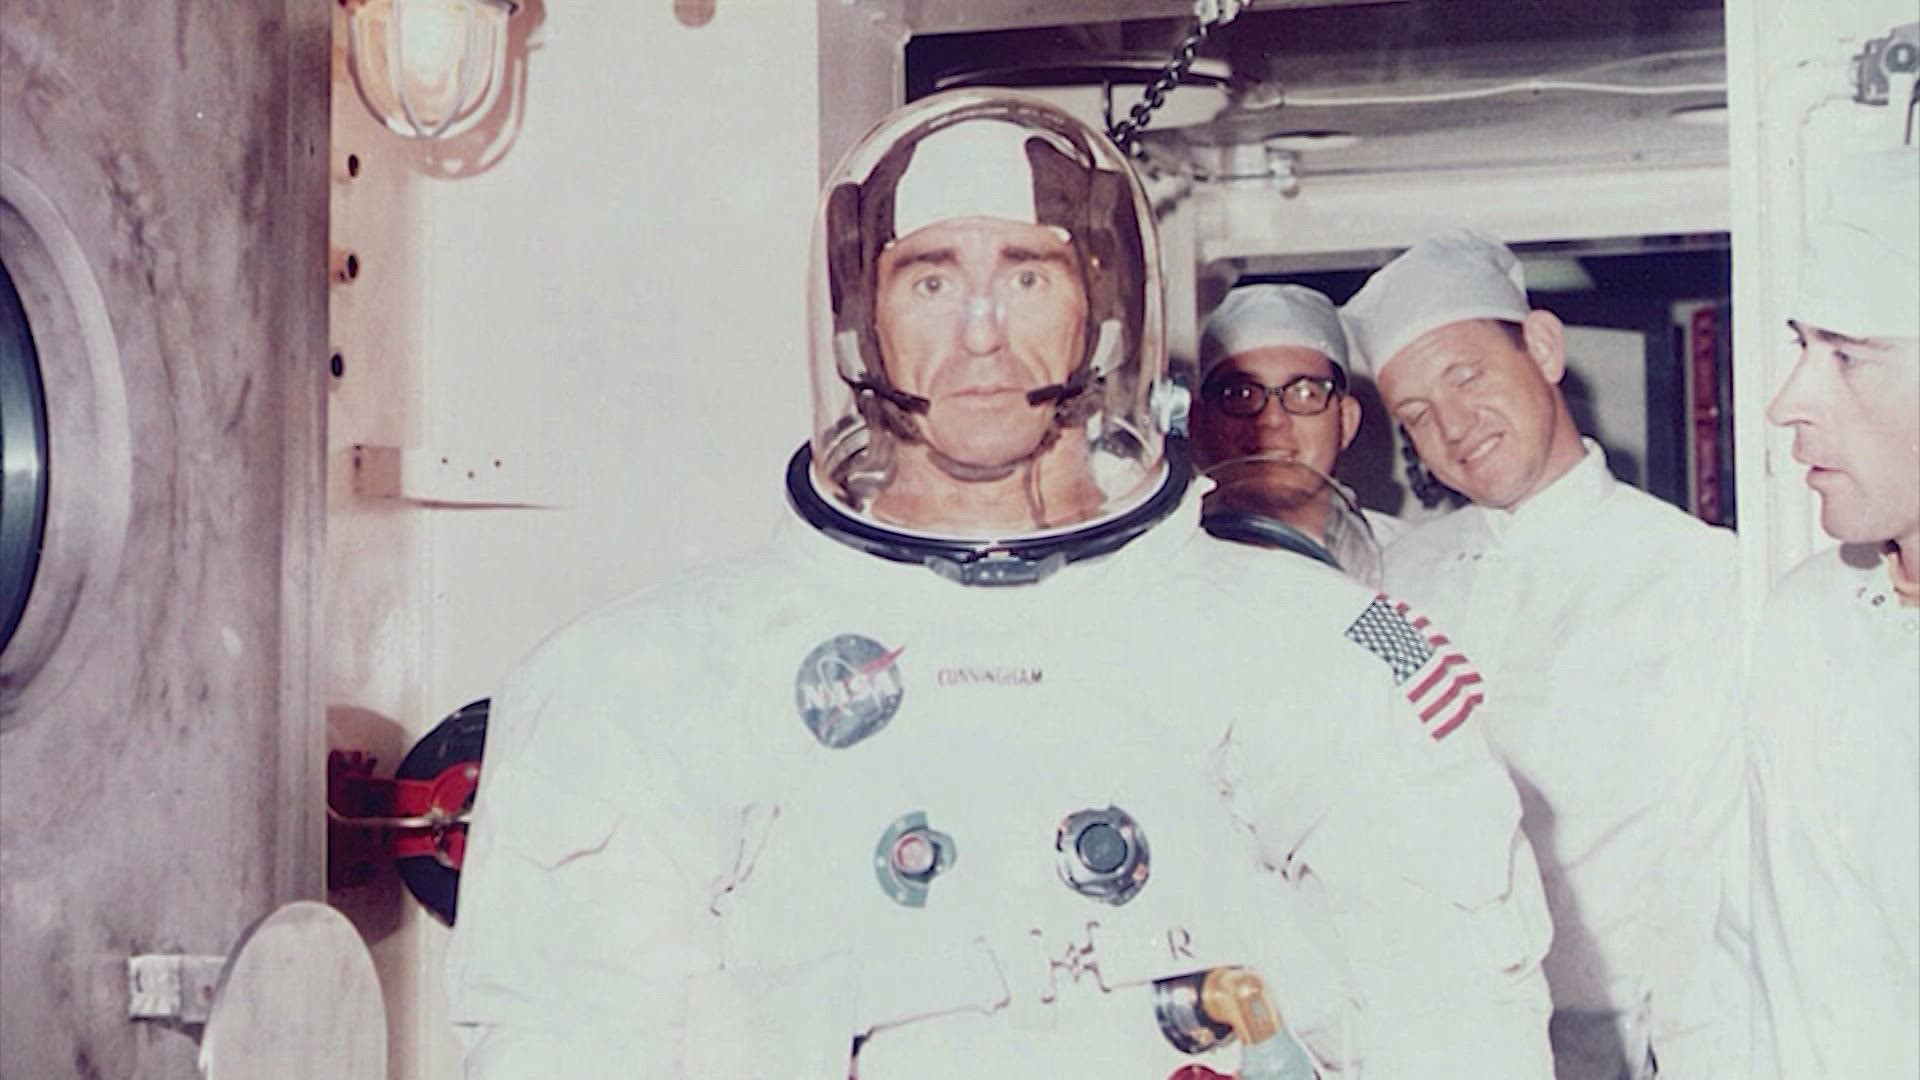 Cunningham was one of three astronauts aboard the 1968 Apollo 7 mission, an 11-day spaceflight that beamed live television broadcasts as they orbited Earth.